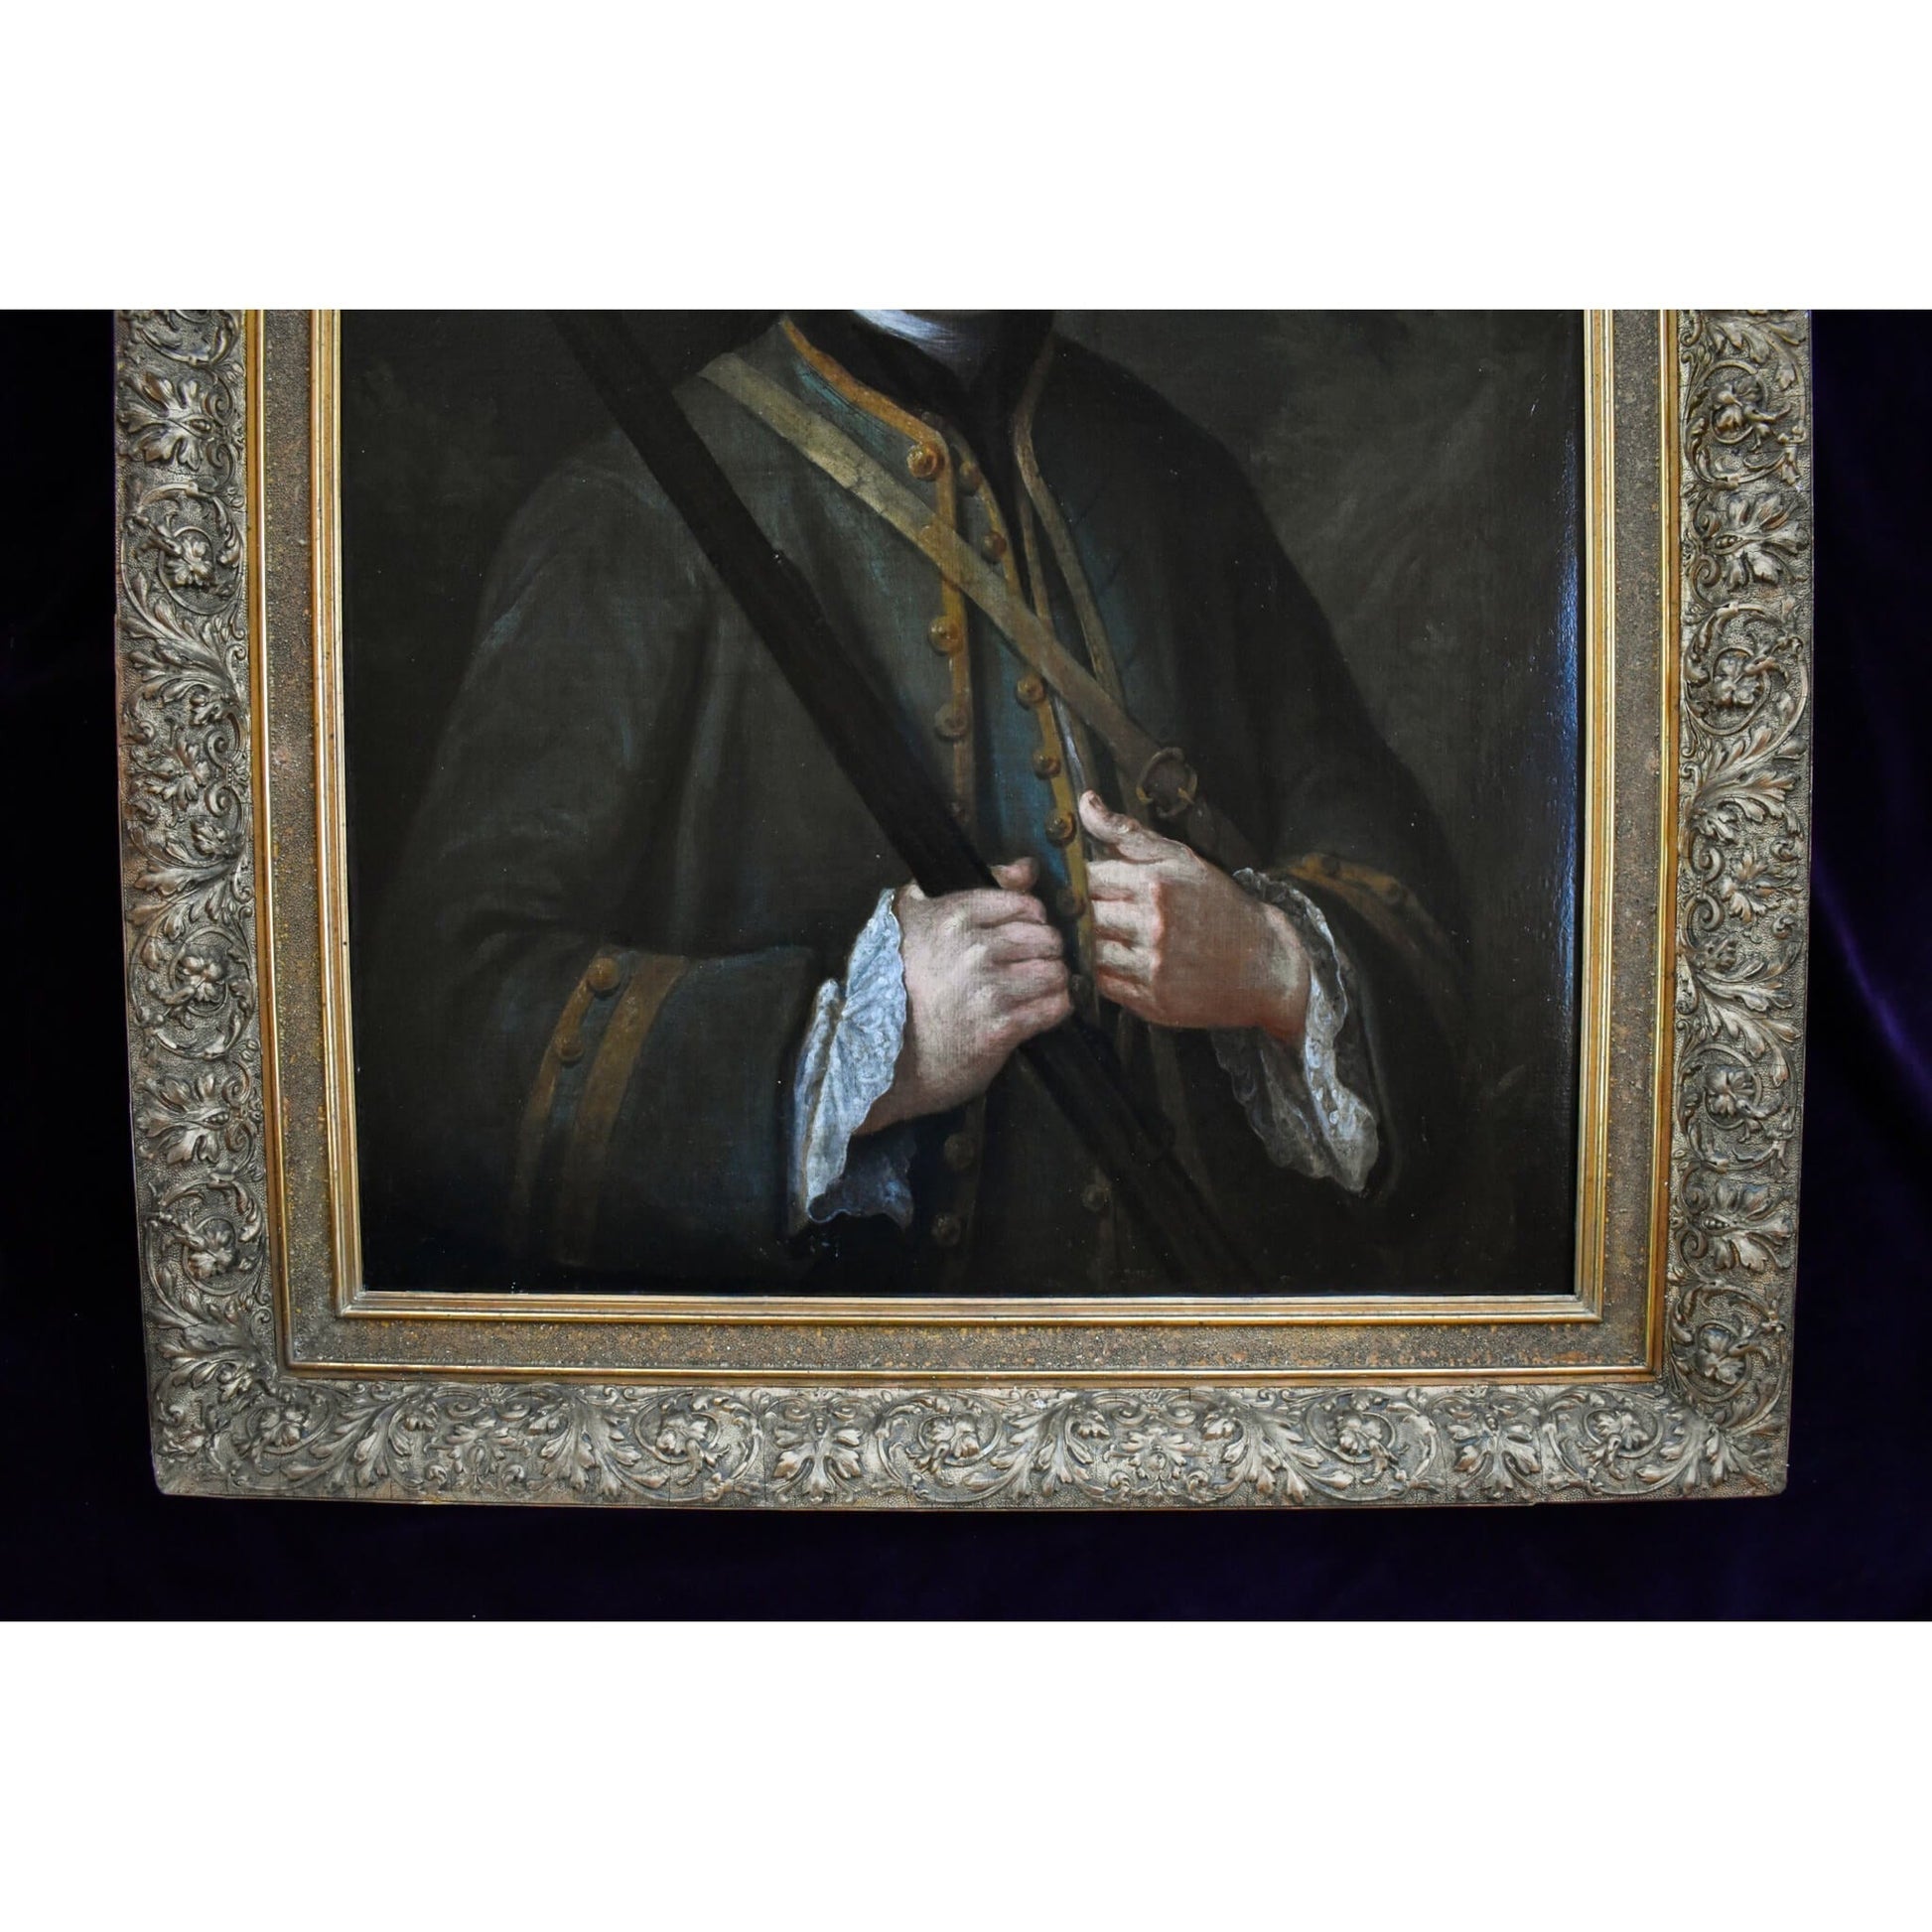 Antique portrait oil painting hunter french nobleman original 1758 by Georges de Roose for sale at Winckelmann Gallery